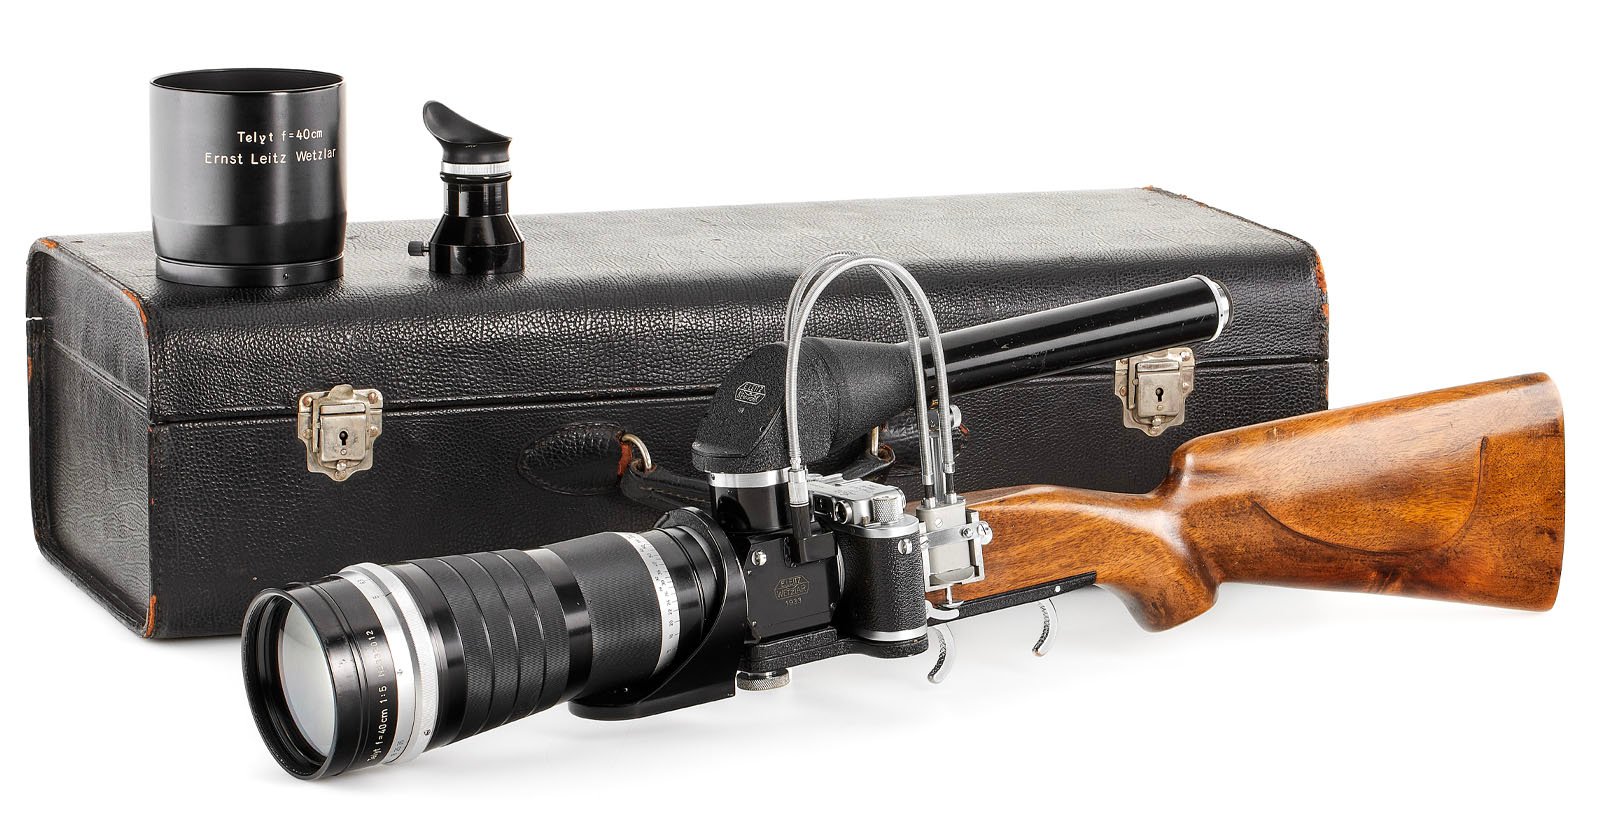 Super-Rare Leica Rifle Camera Expected to Sell for $280,000